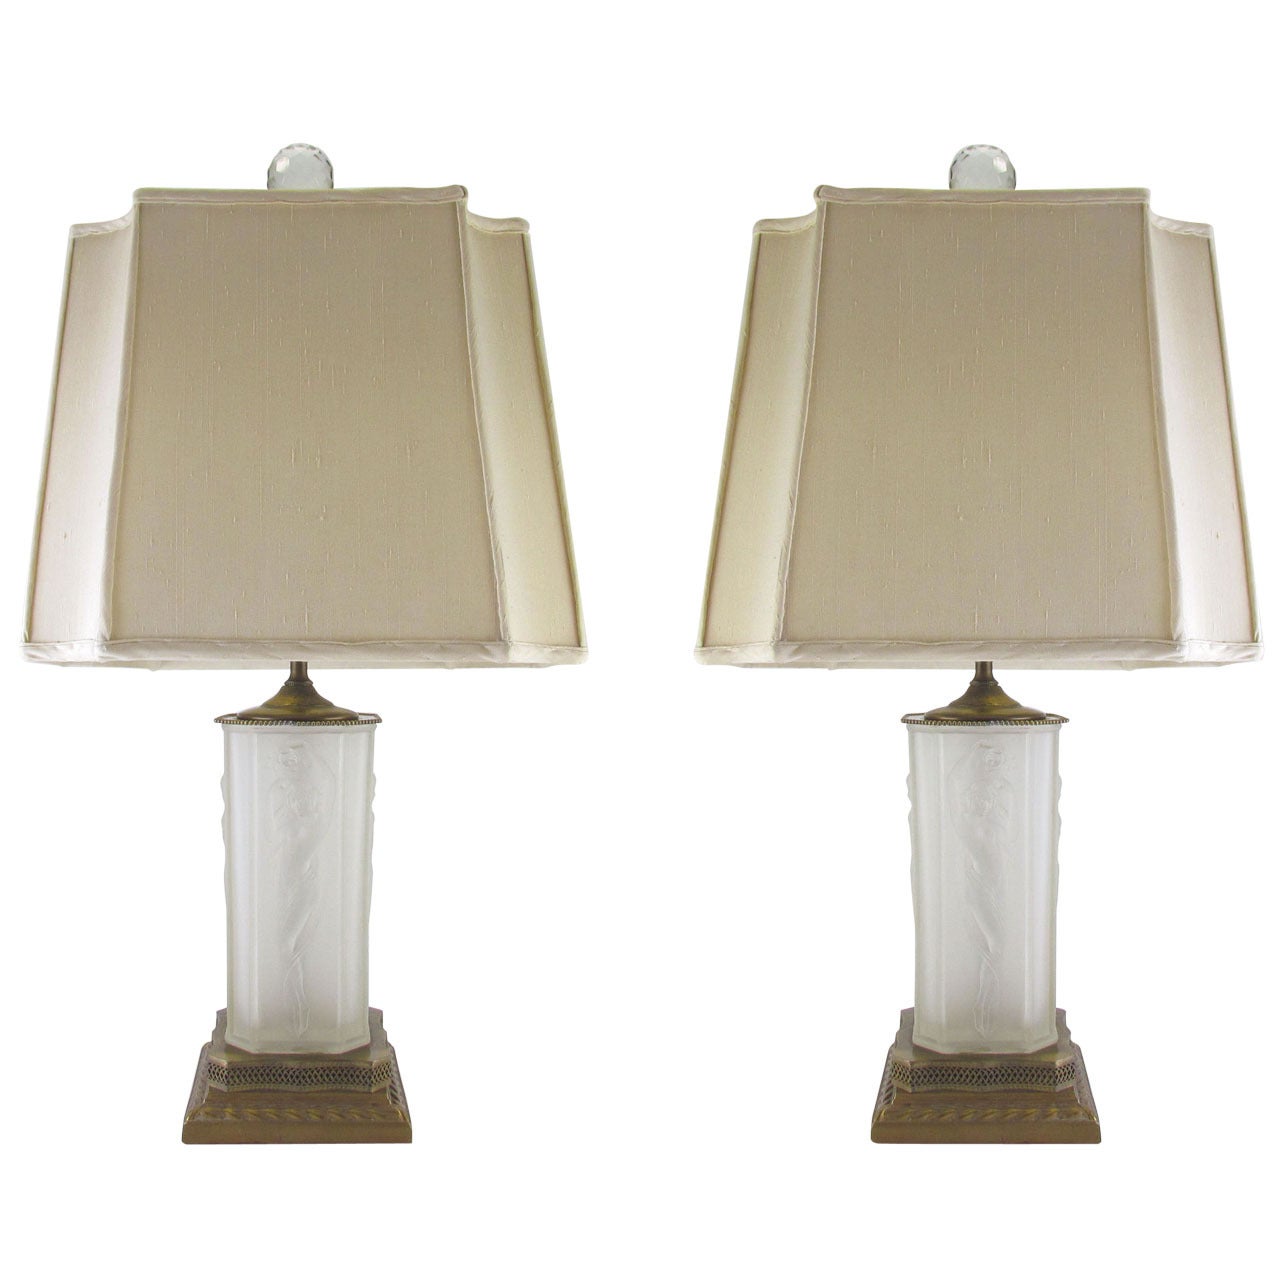 Pair of Art Nouveau Art Glass Table Lamps in the Manner of Lalique